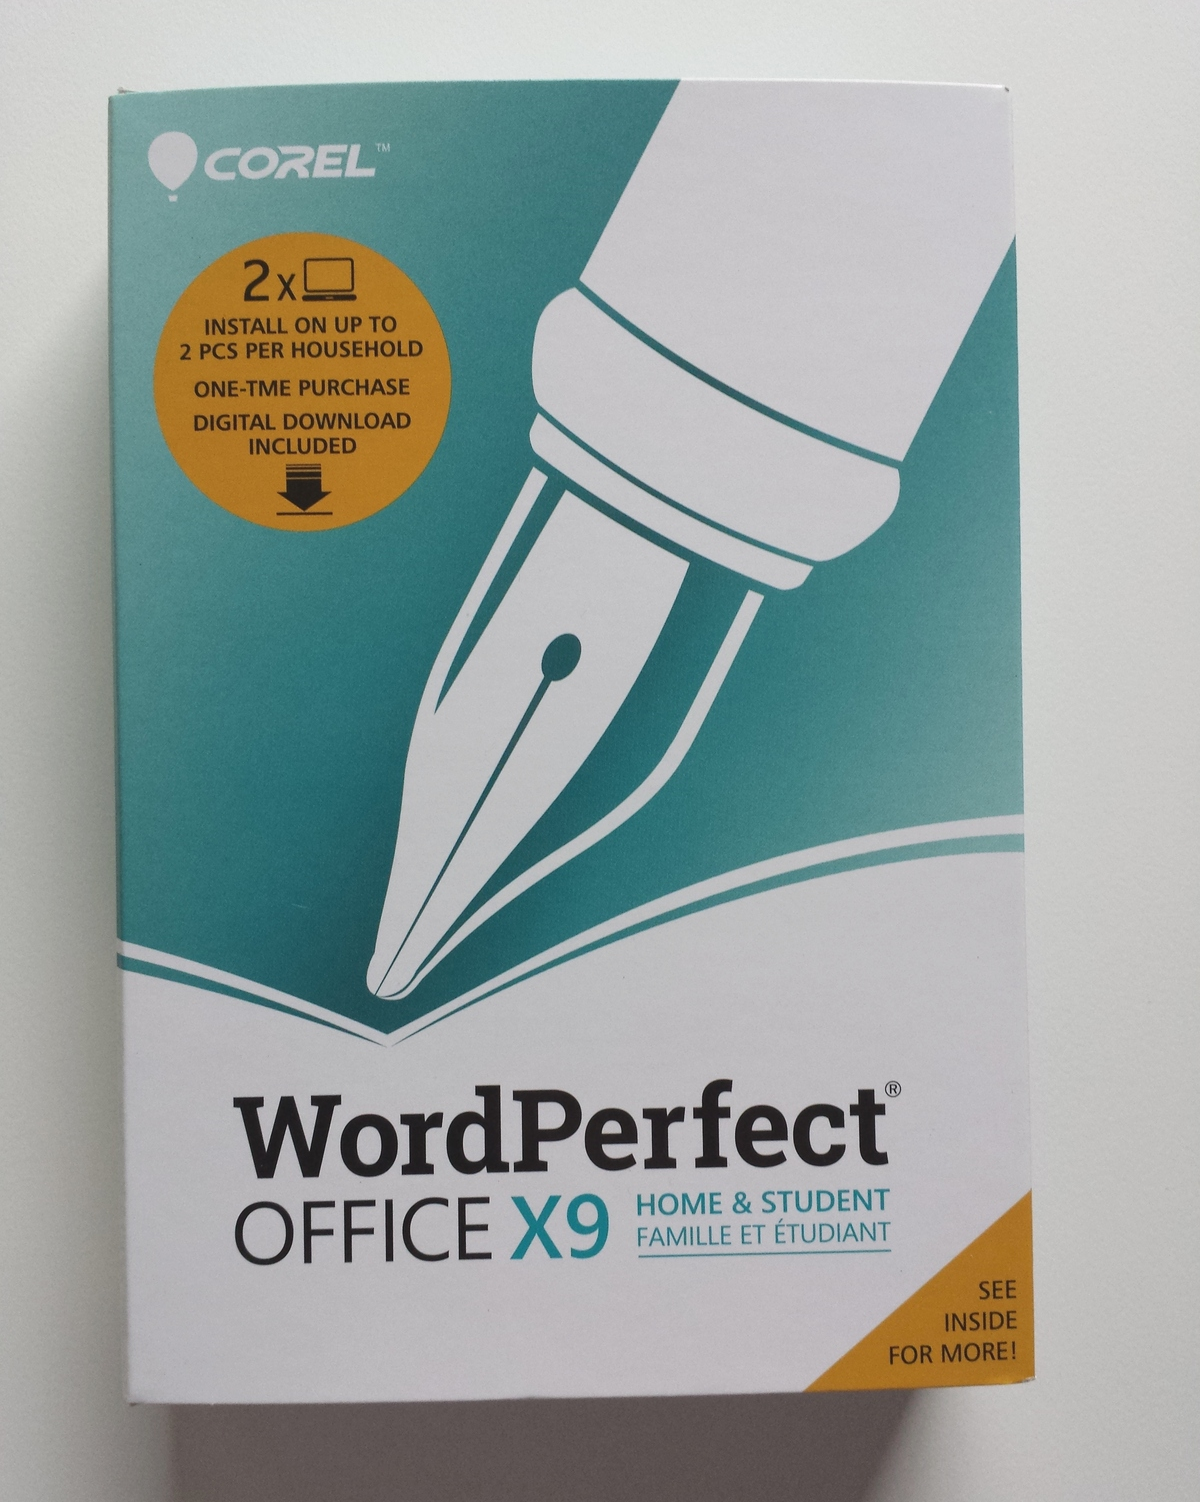 Corel Wordperfect Office X9 Home & Student - Sealed Retail Box - $40.00